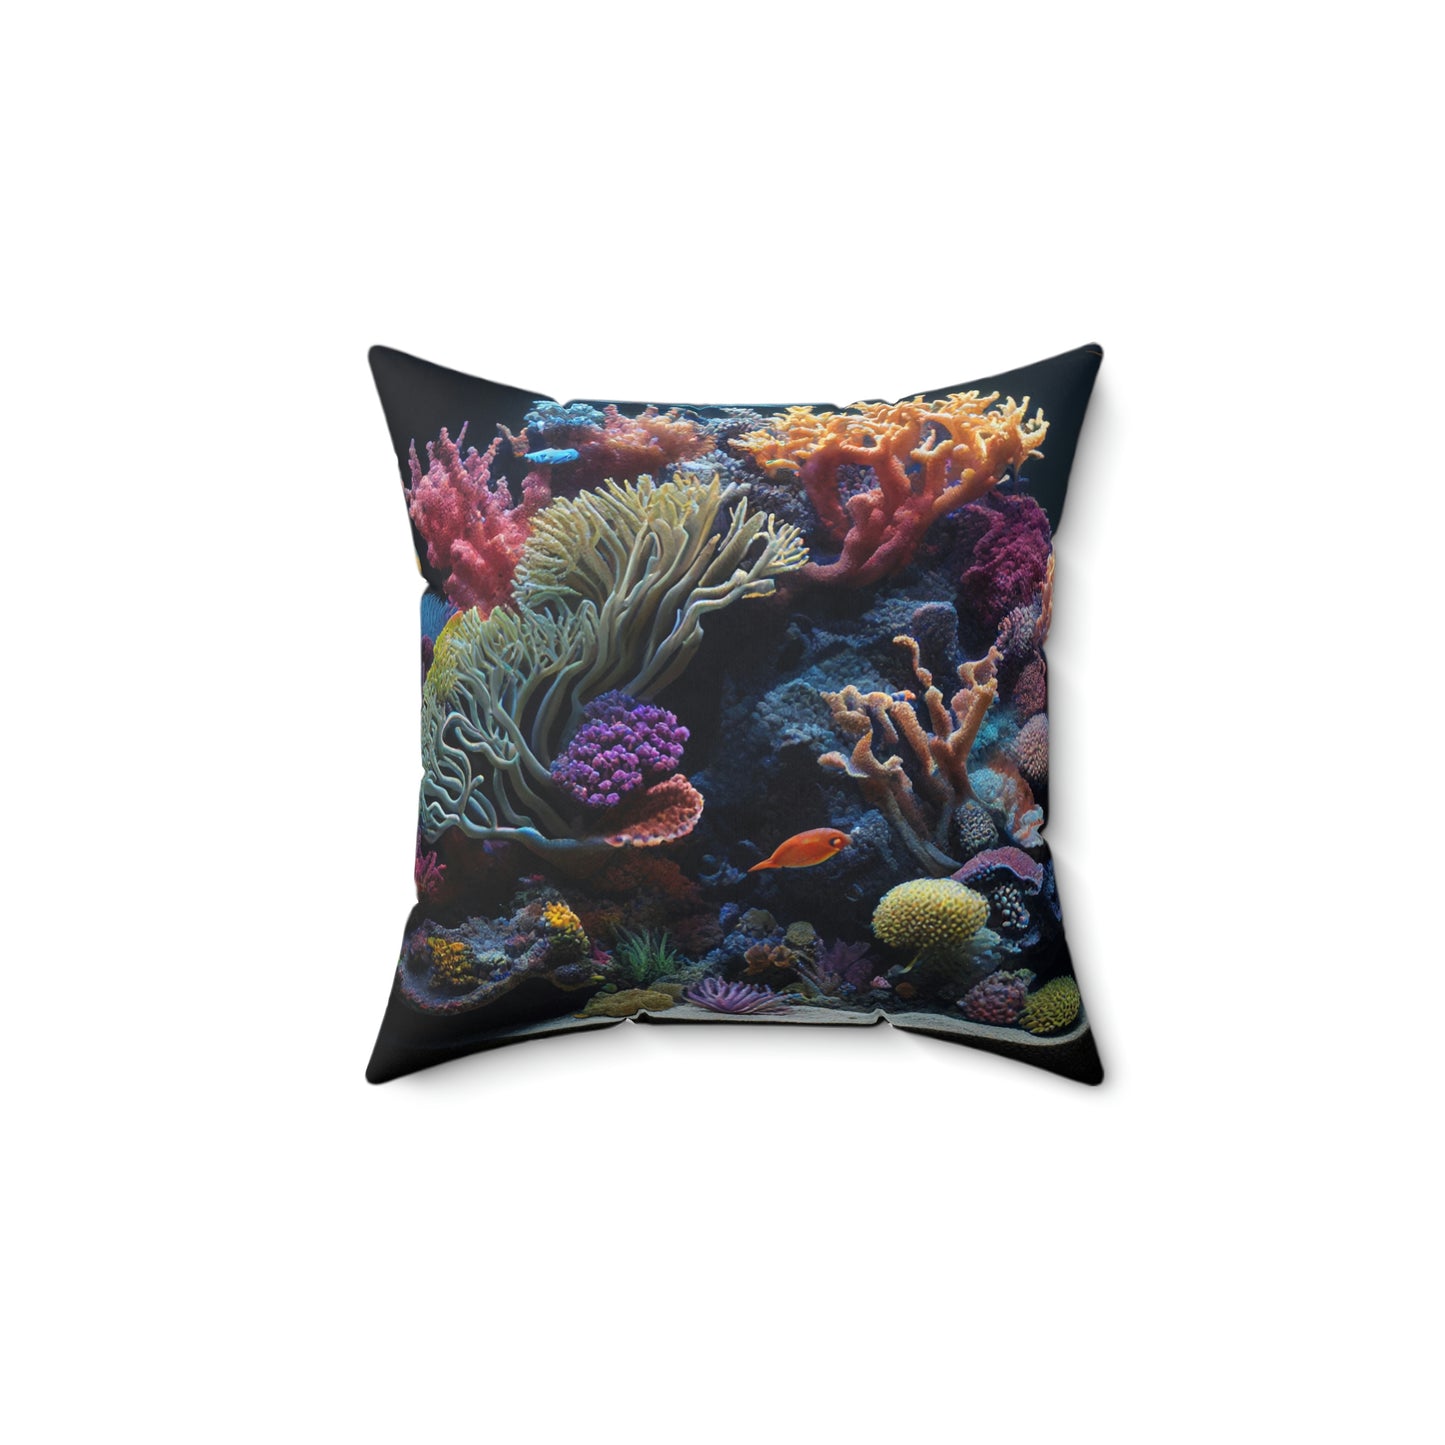 Coral Fest Pillow - Reef of Clowns